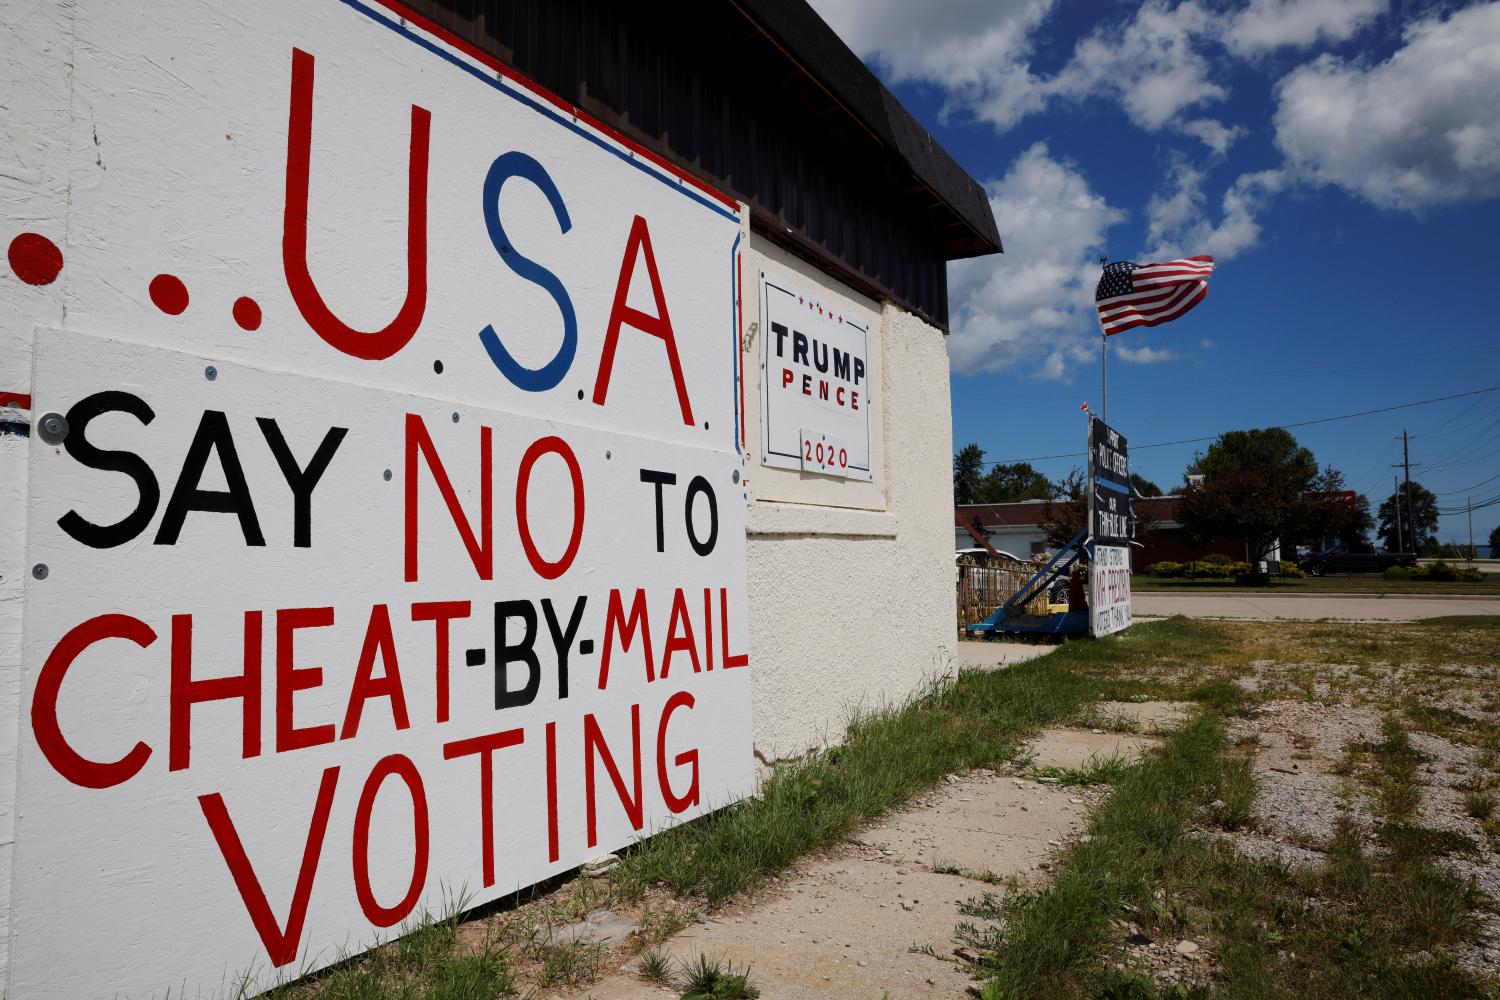 Handmade signs supporting U.S. President Donald Trump, including one opposing mail-in voting, stand outside a business in Manitowoc, Wisconsin, U.S., August 18, 2020. REUTERS/Brian Snyder